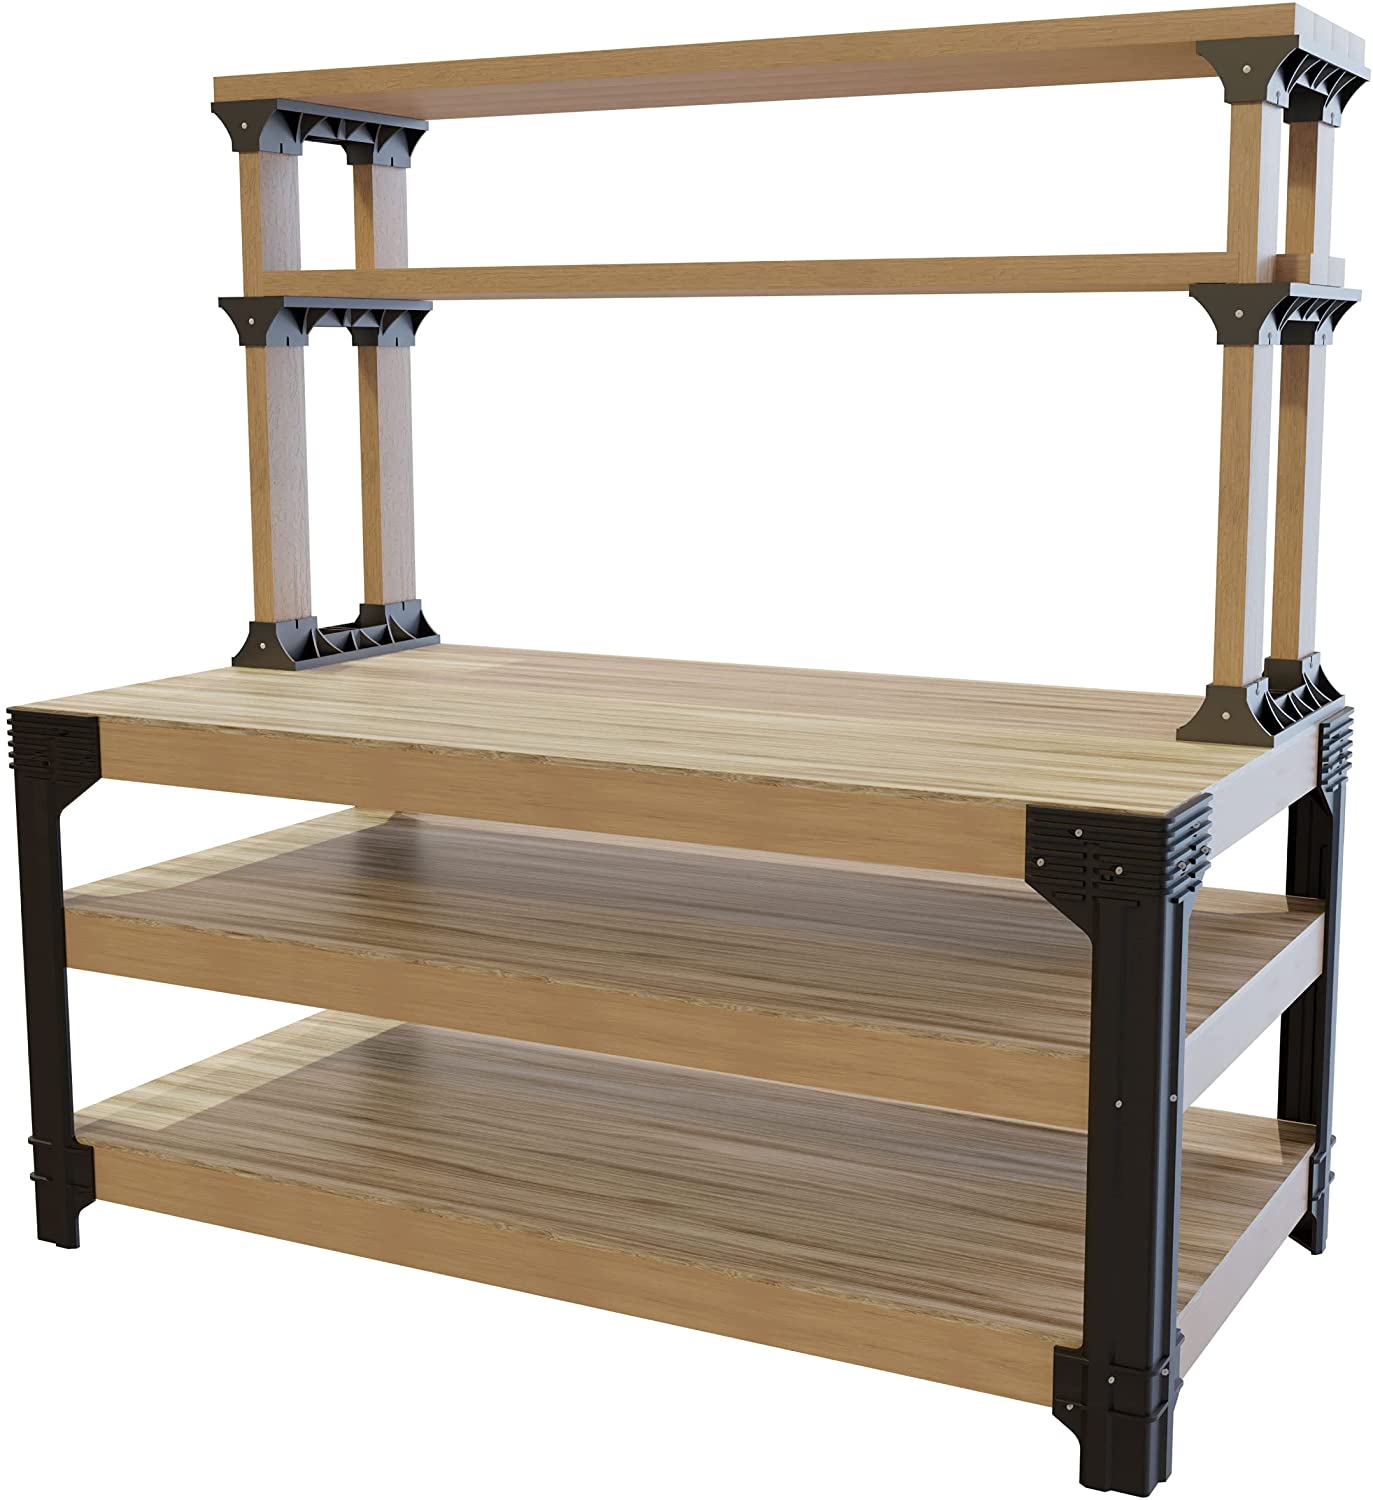 Hopkins Workbench and Shelving Storage System